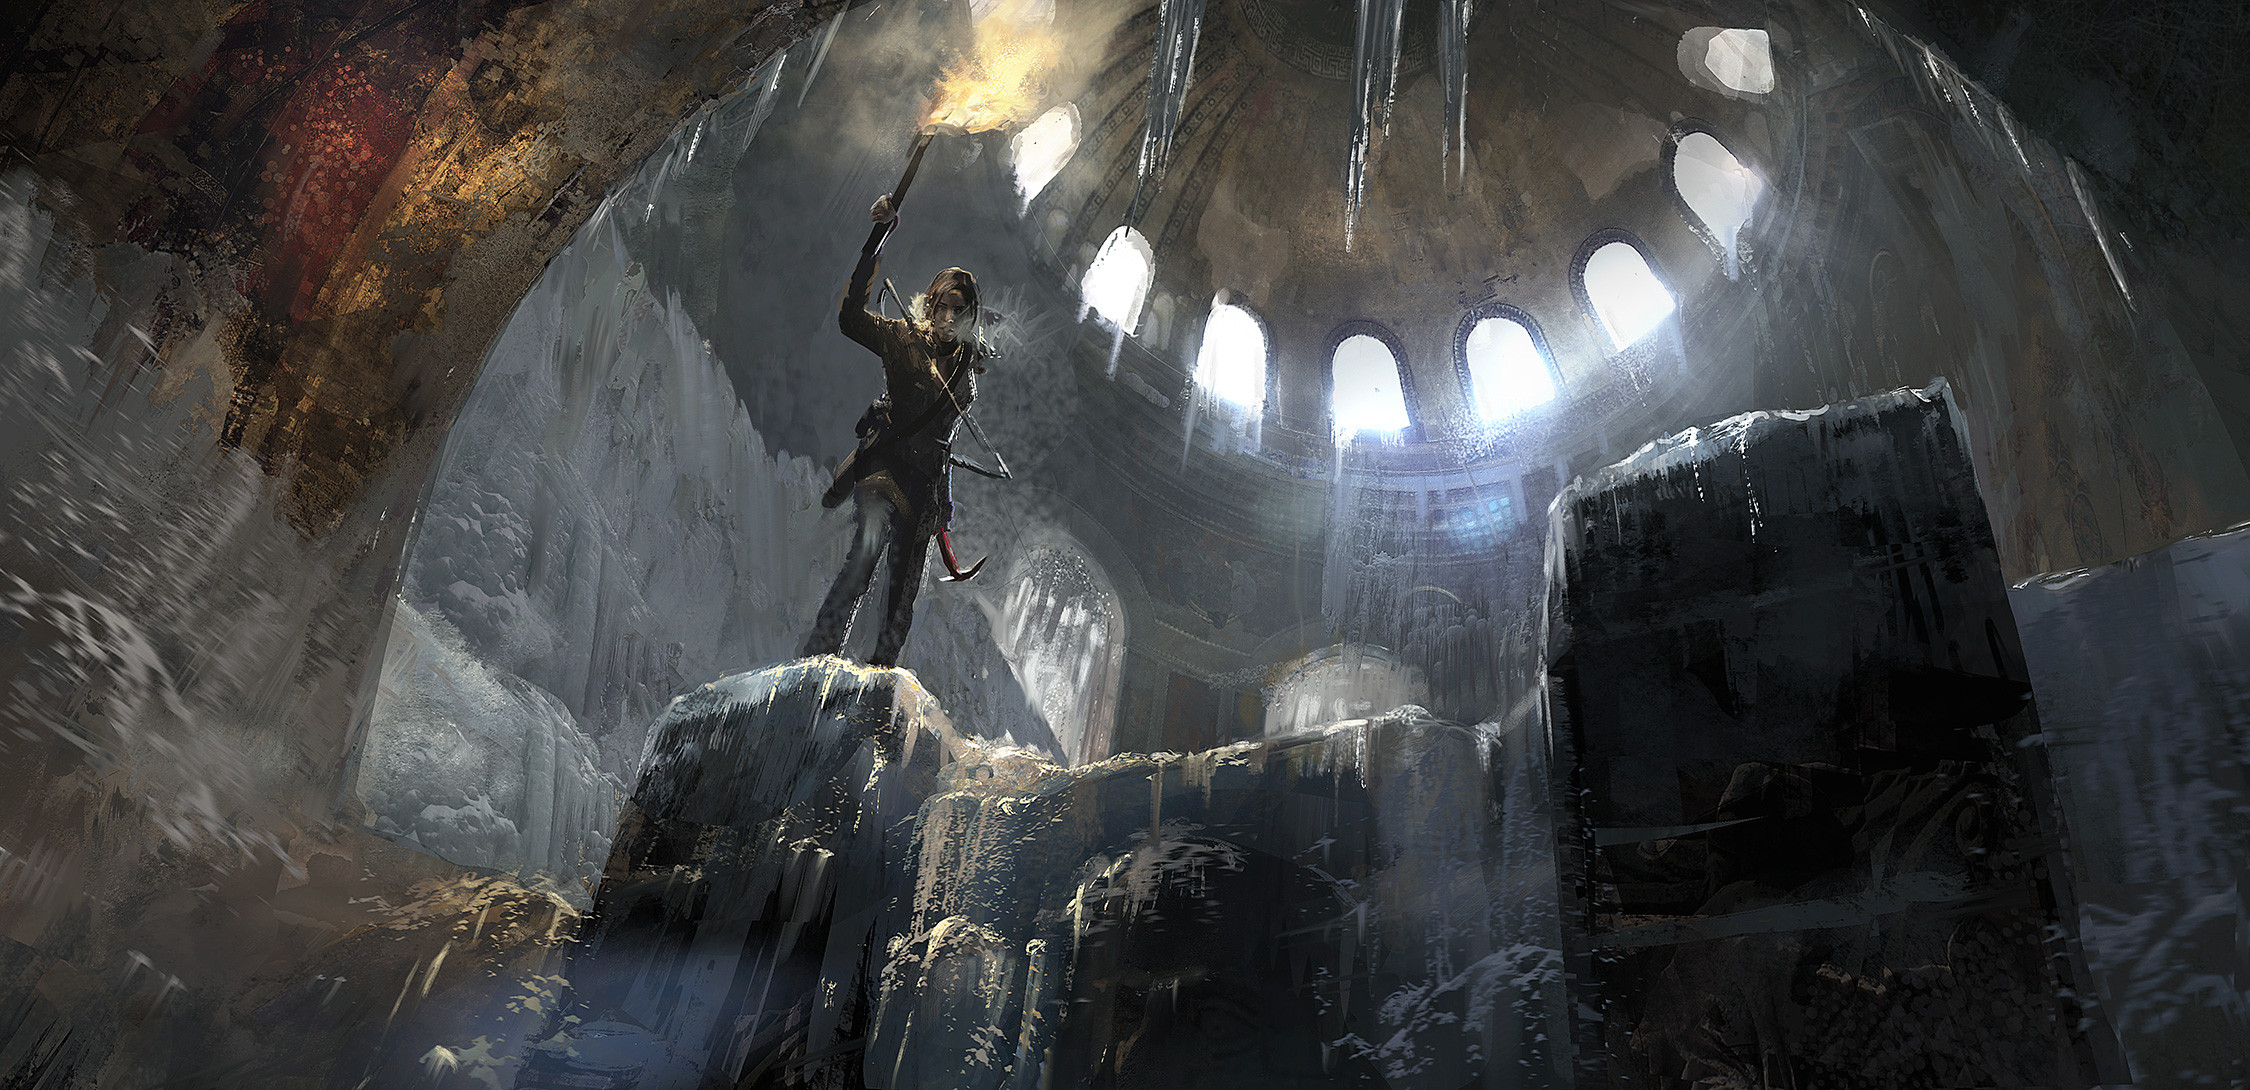 Rijpen chef Terminologie Rise of the Tomb Raider Story, Gameplay Details Revealed - GameRevolution